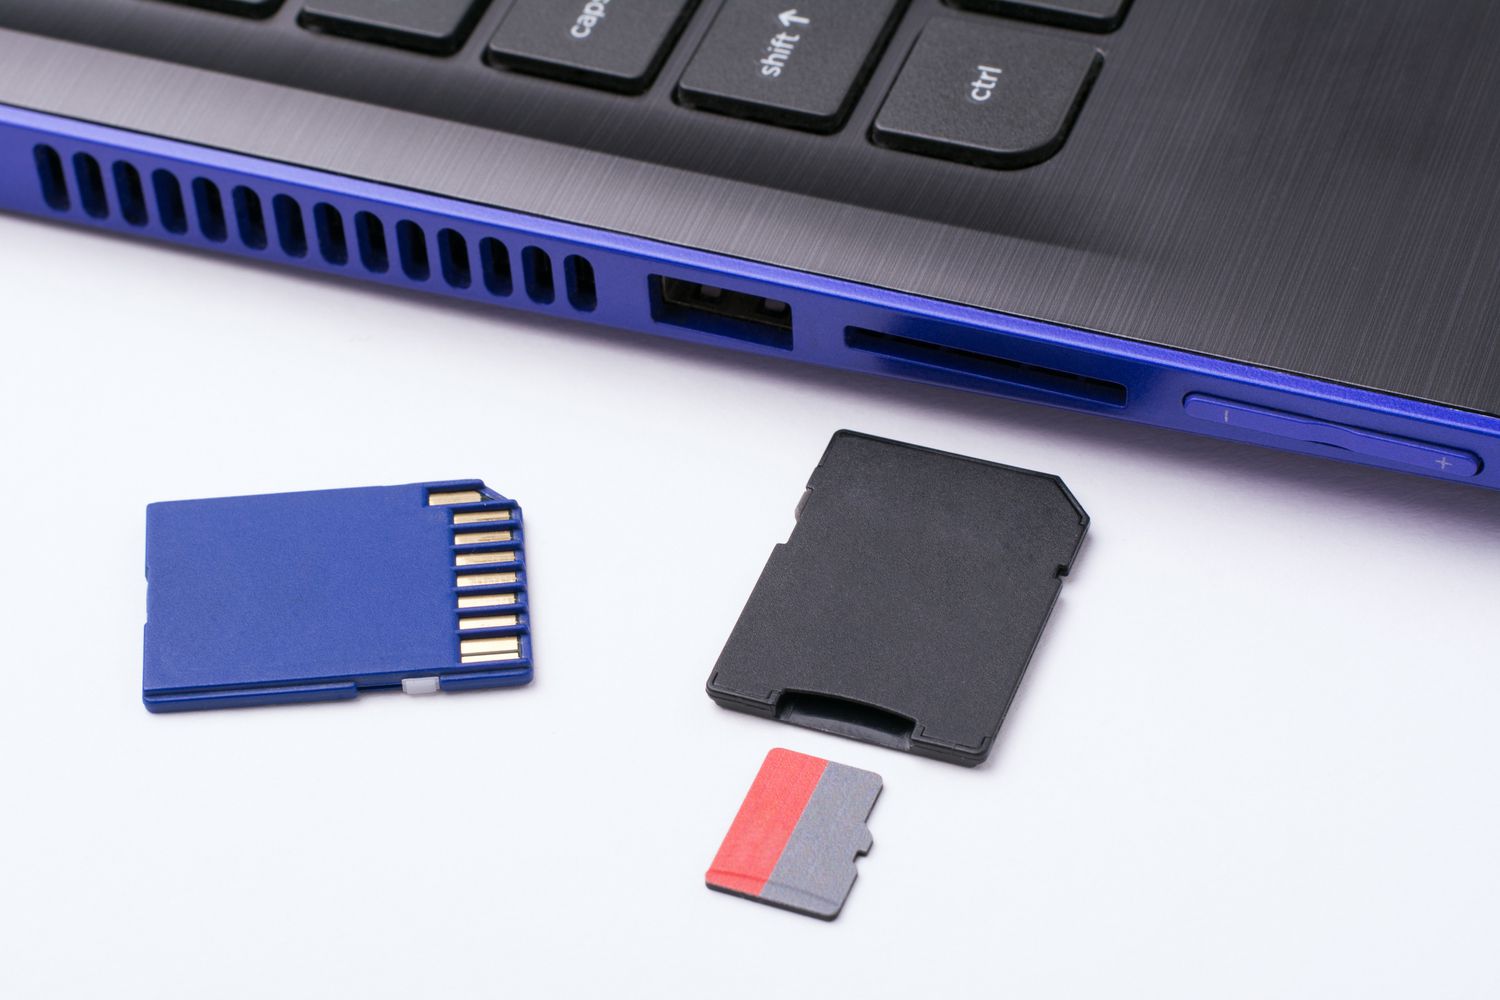 How To Use An SD Card Reader